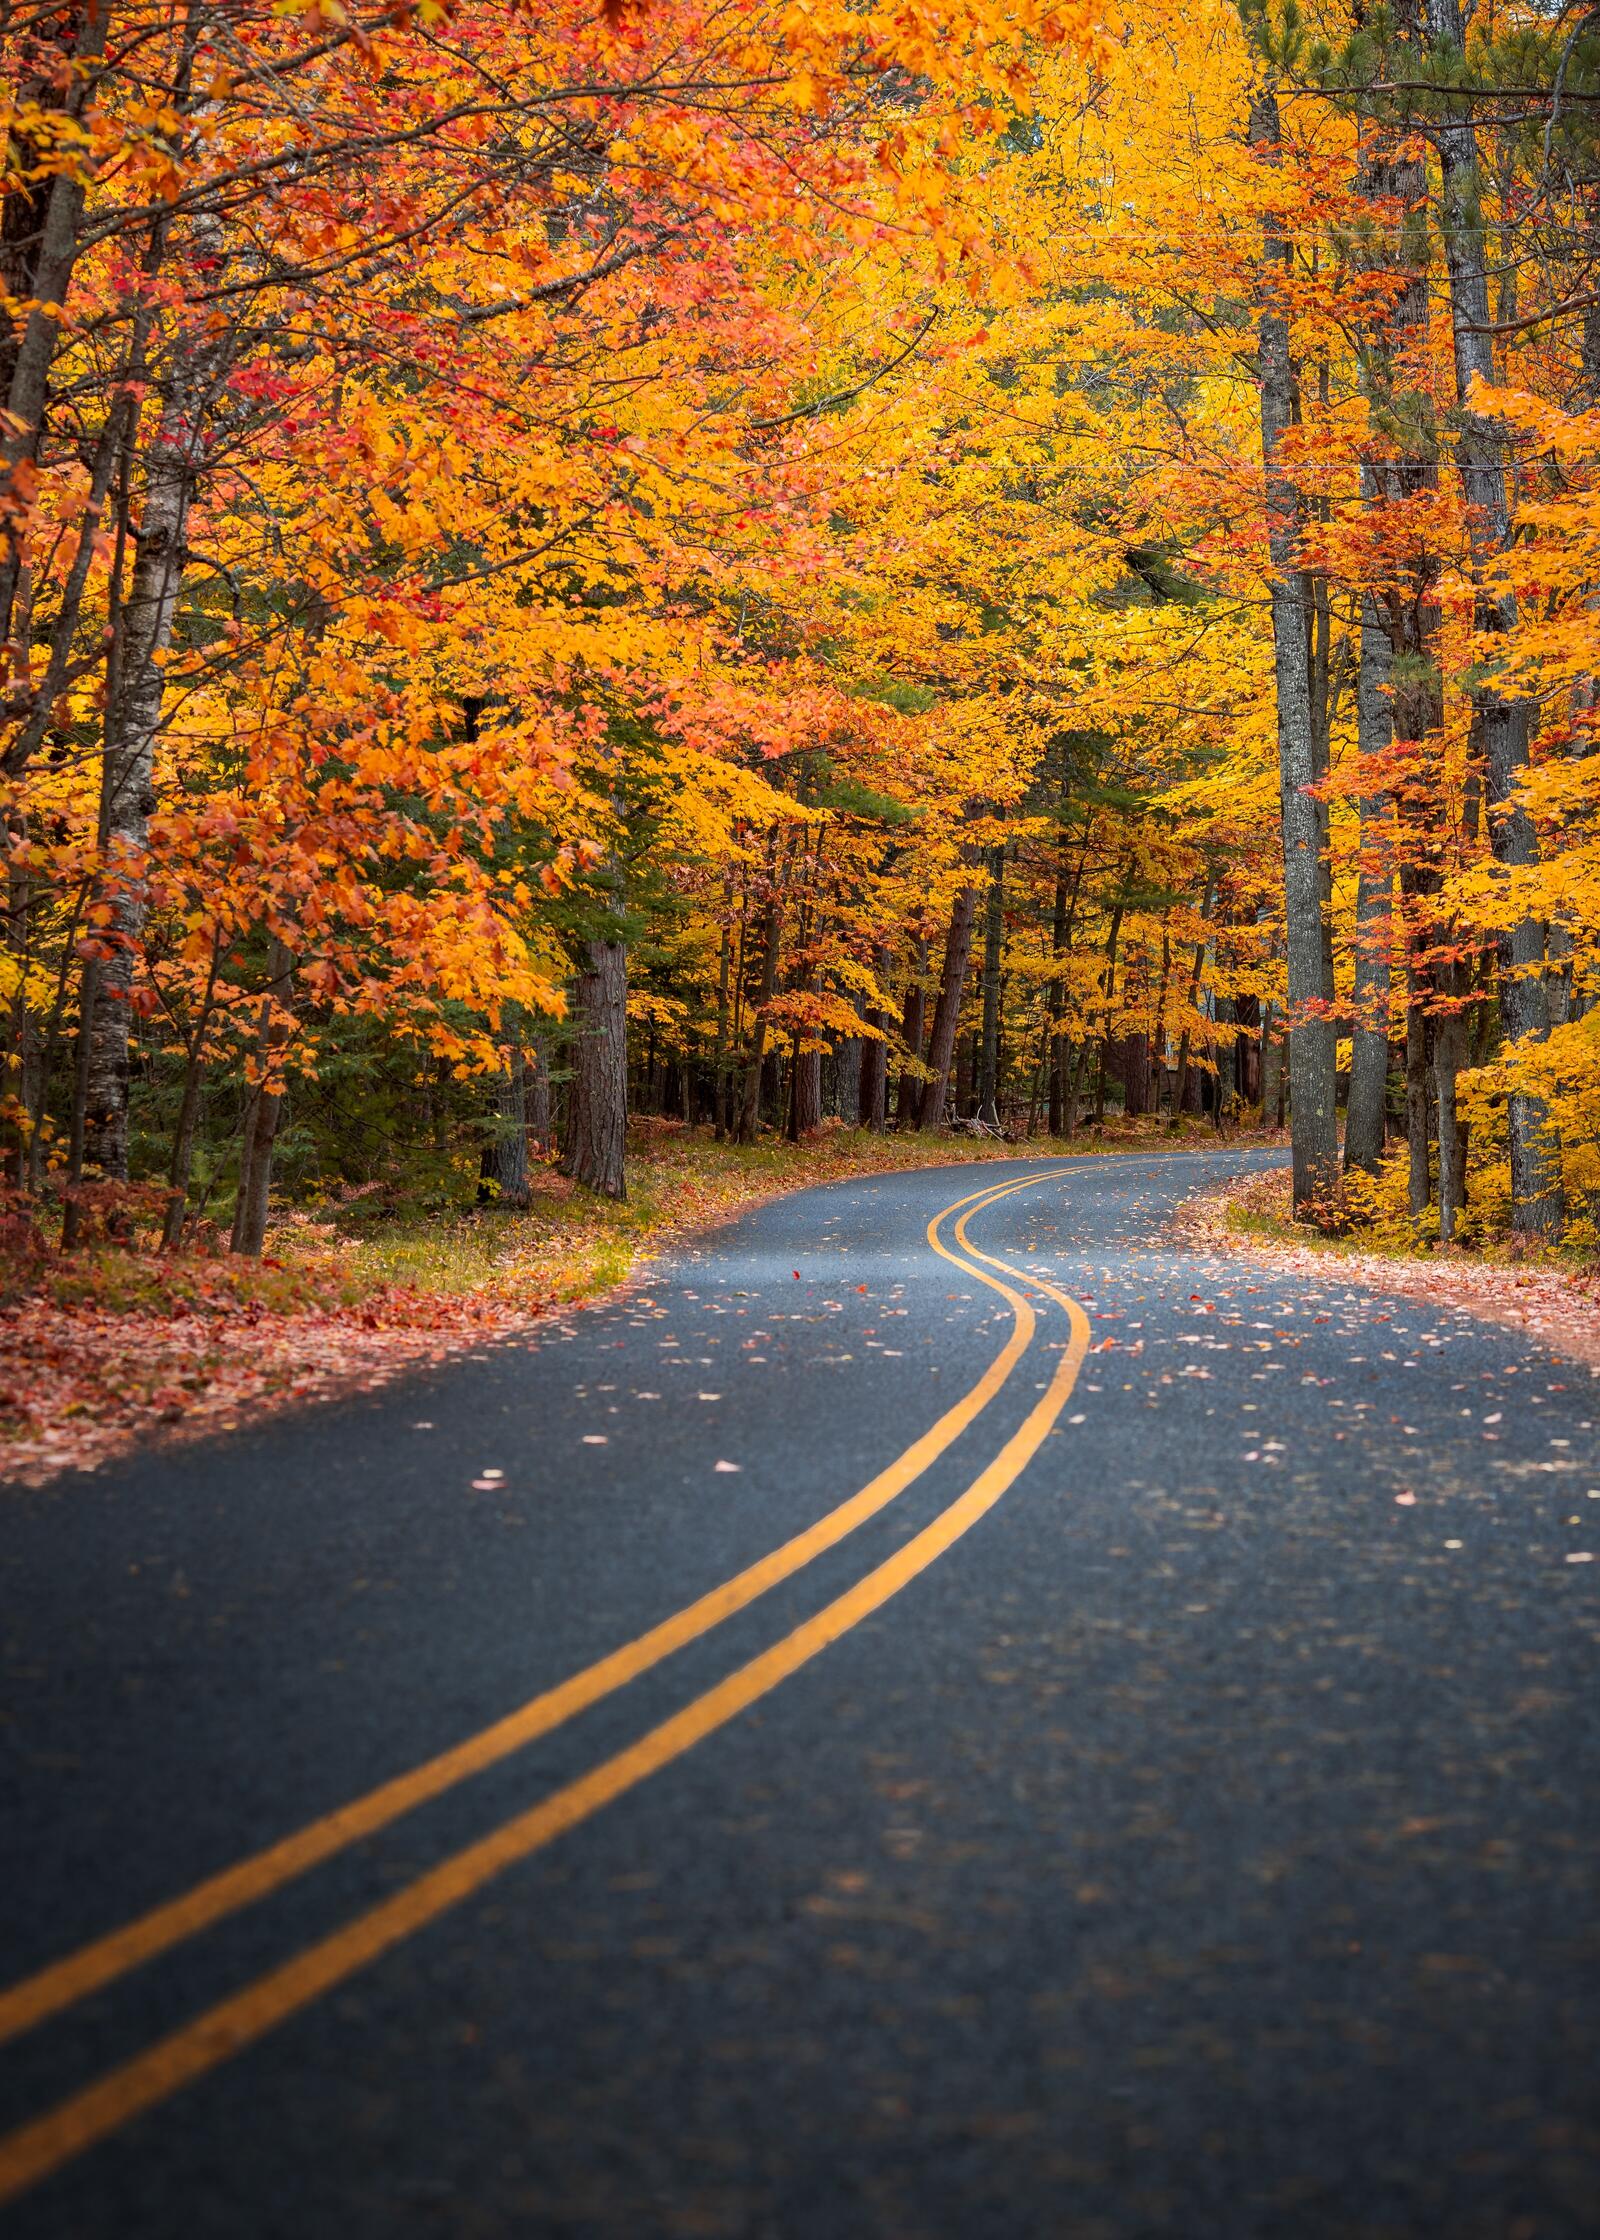 Free photo A road with yellow stripes leading to an autumn forest with yellow foliage